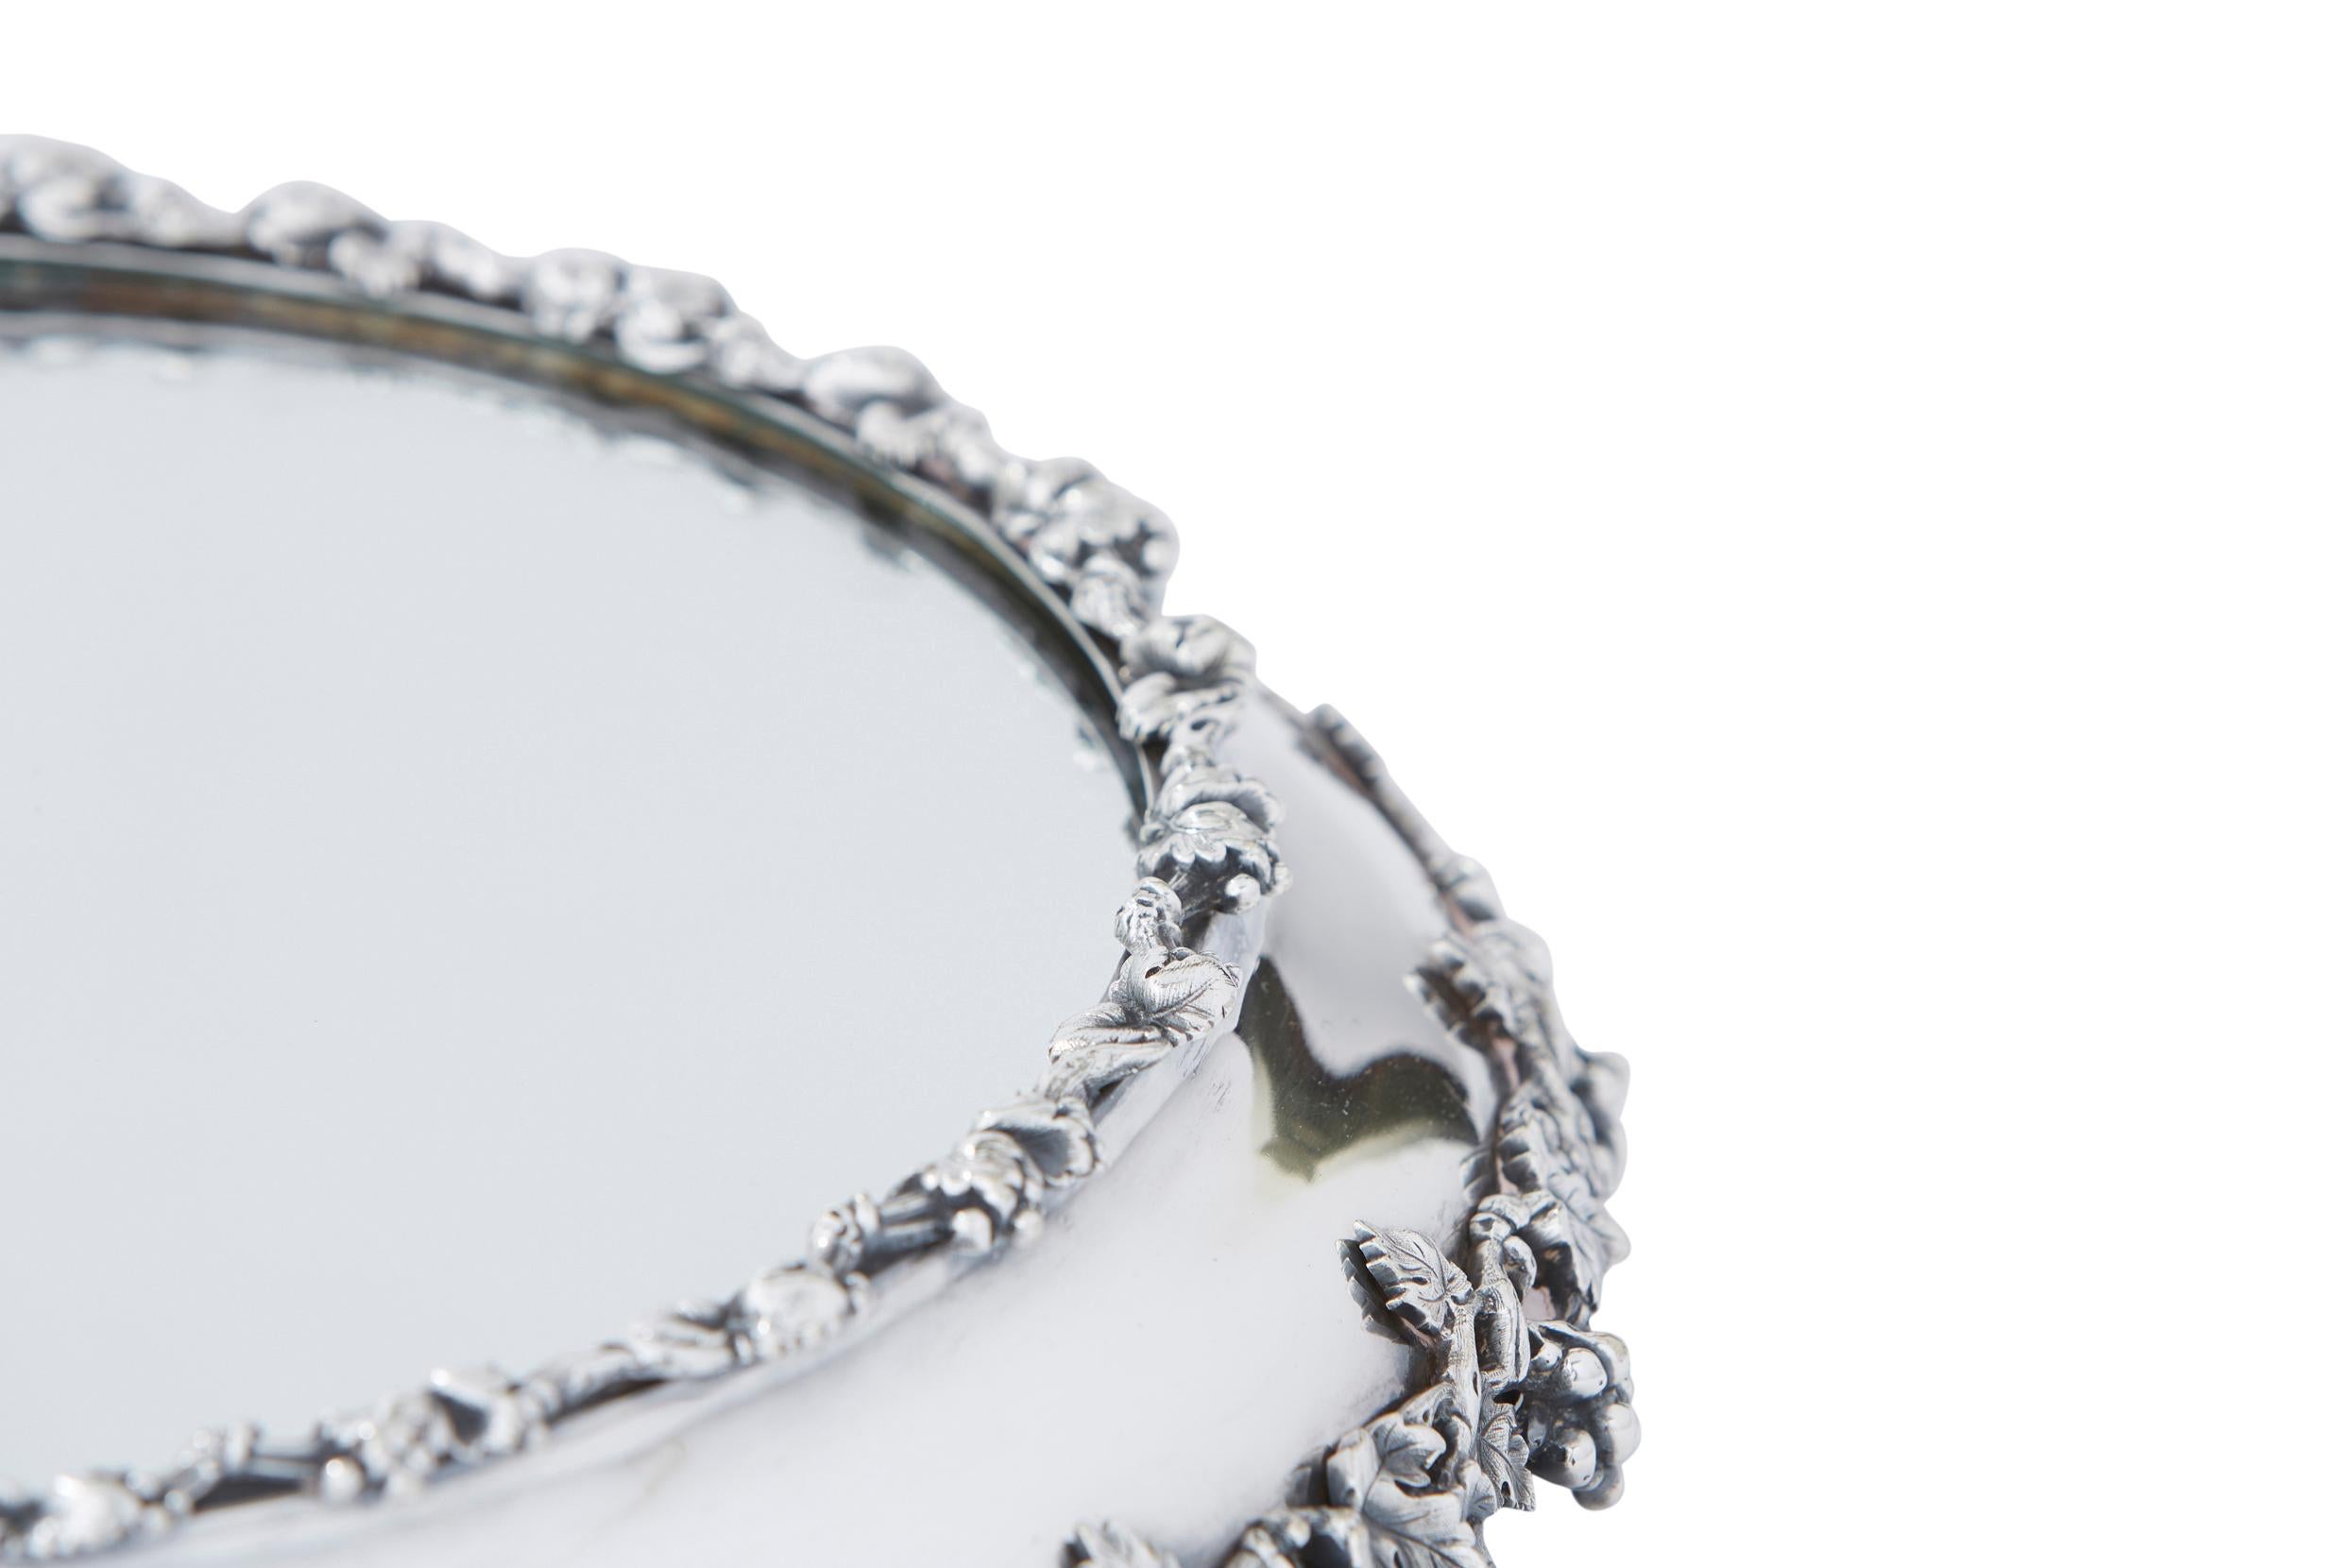 Hand-Crafted English Silver Mounted / Mirrored Vanity Tray